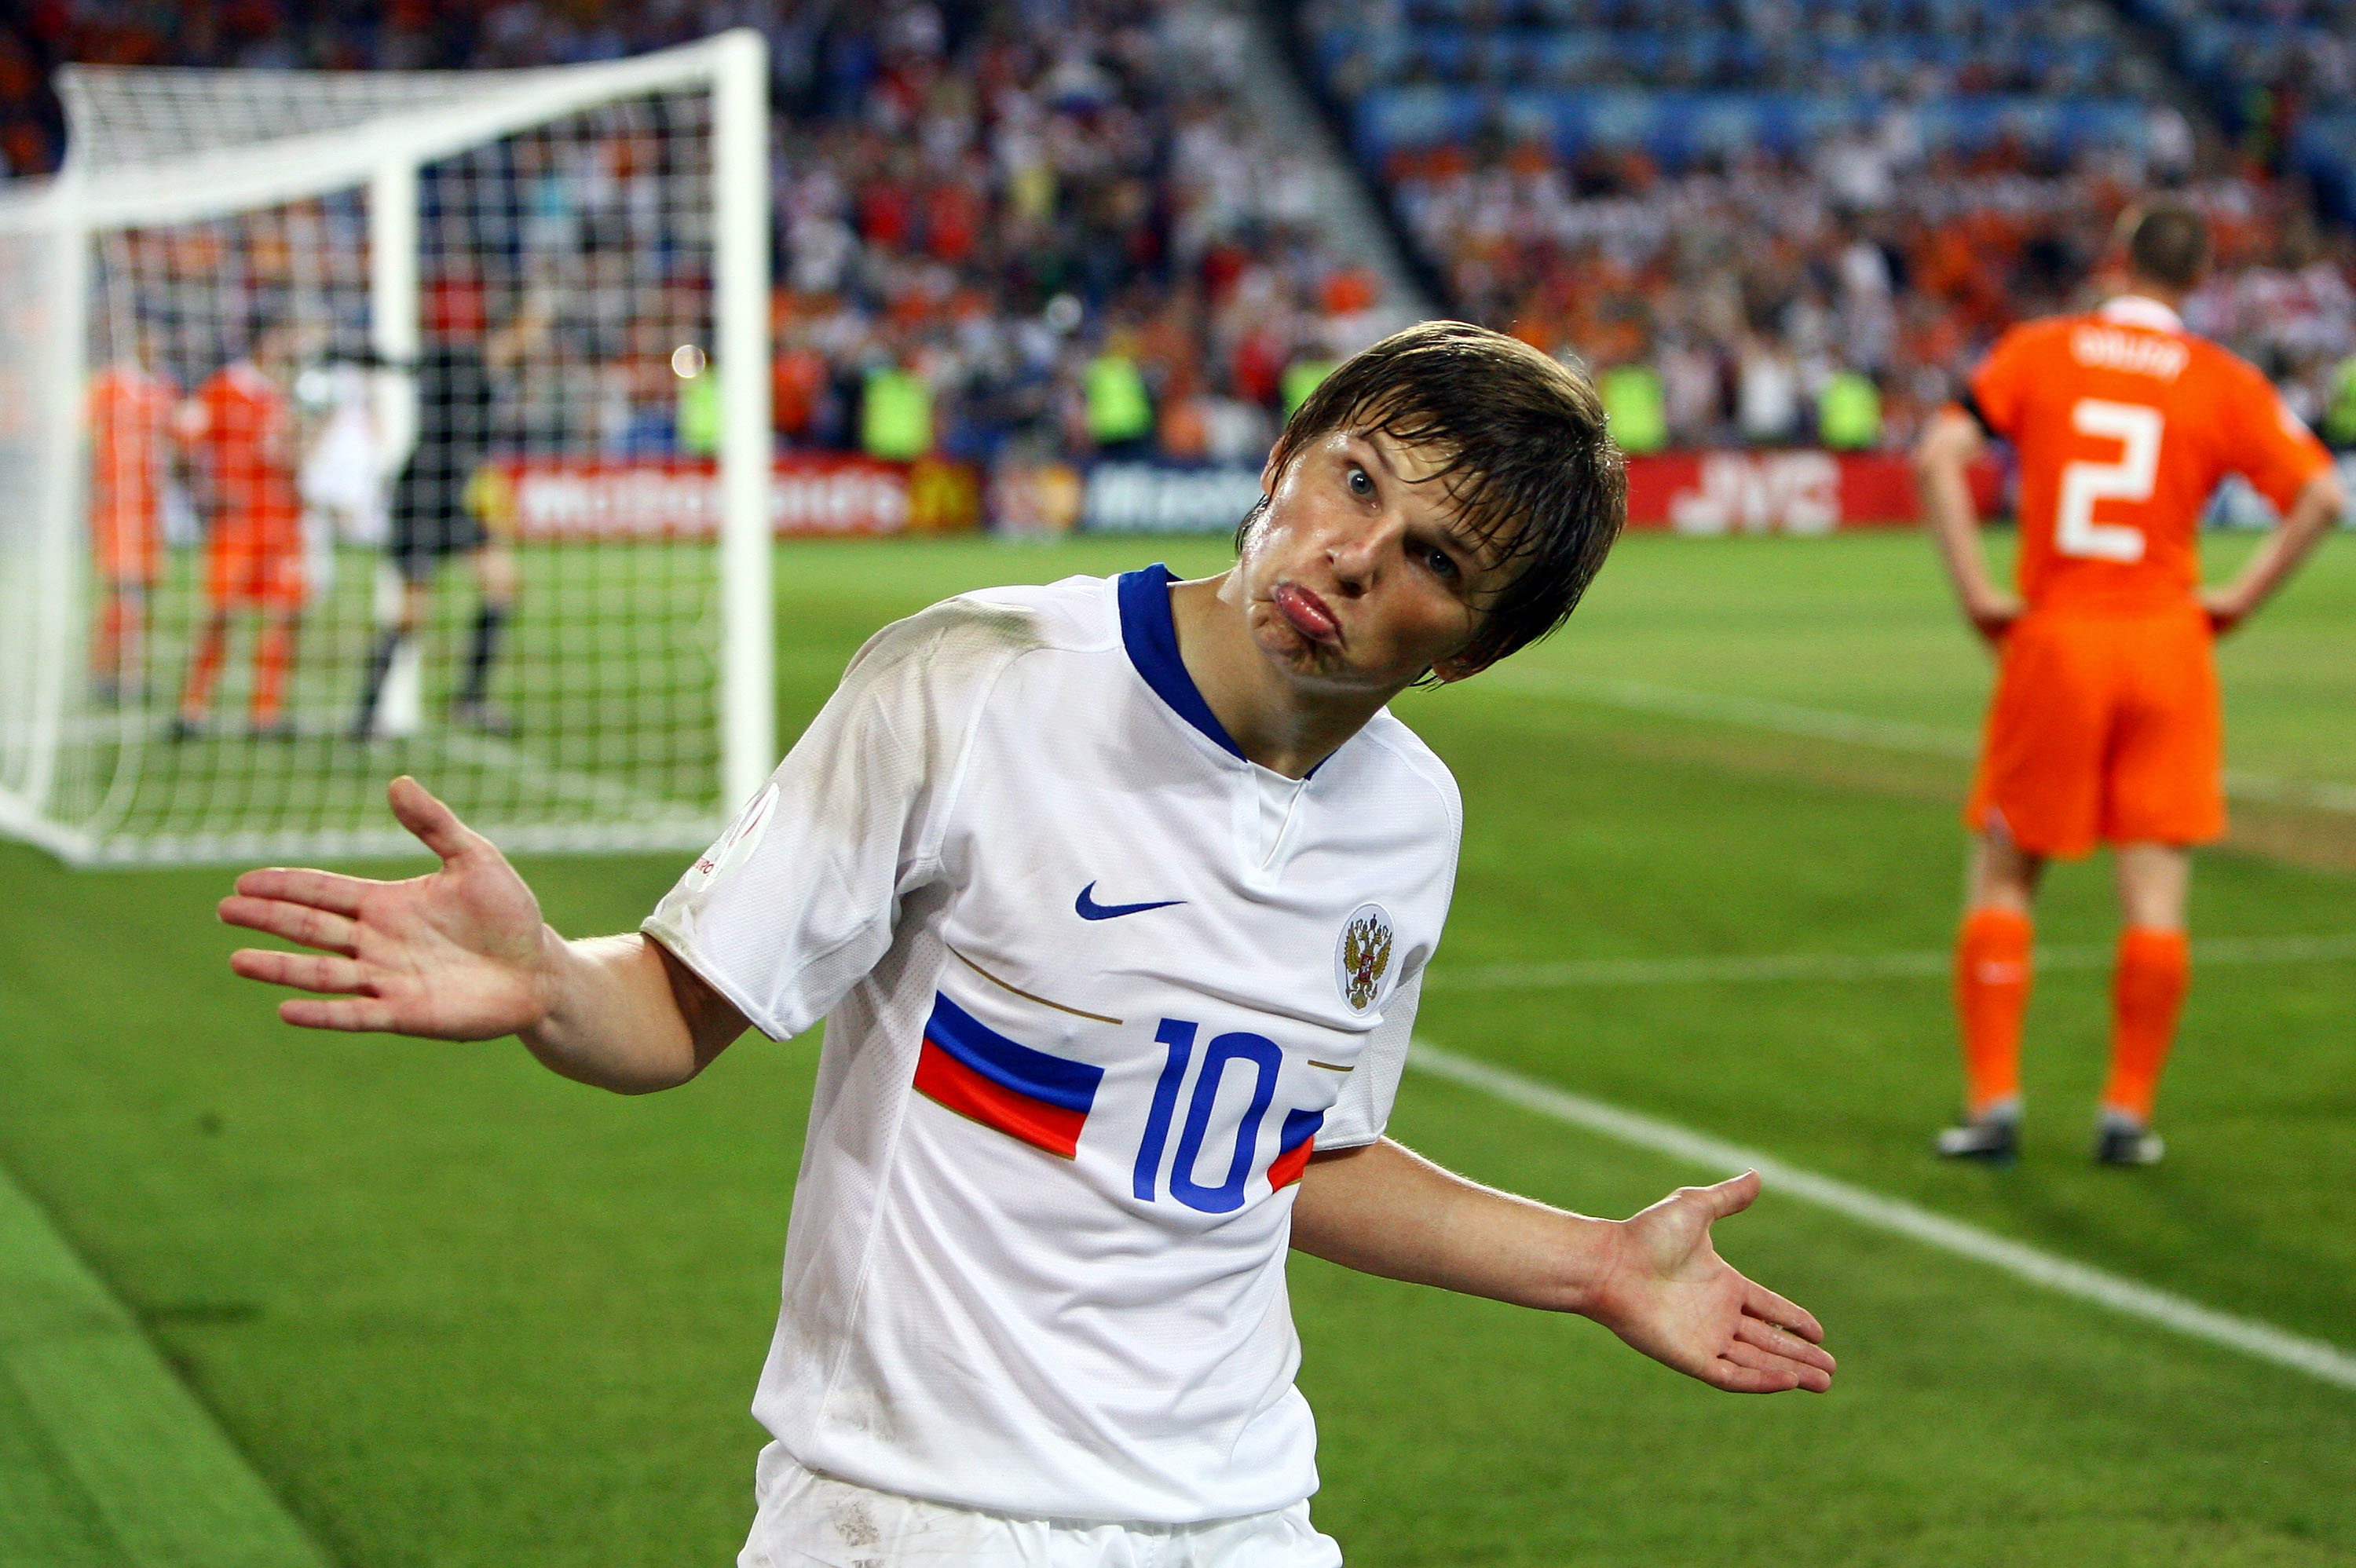 BASEL, SWITZERLAND - JUNE 21: Andrei Arshavin of Russia celebrates Russia's third goal during the UEFA EURO 2008 Quarter Final match between Netherlands and Russia at St. Jakob-Park on June 21, 2008 in Basel, Switzerland. (Photo by Alex Livesey/Getty Images)